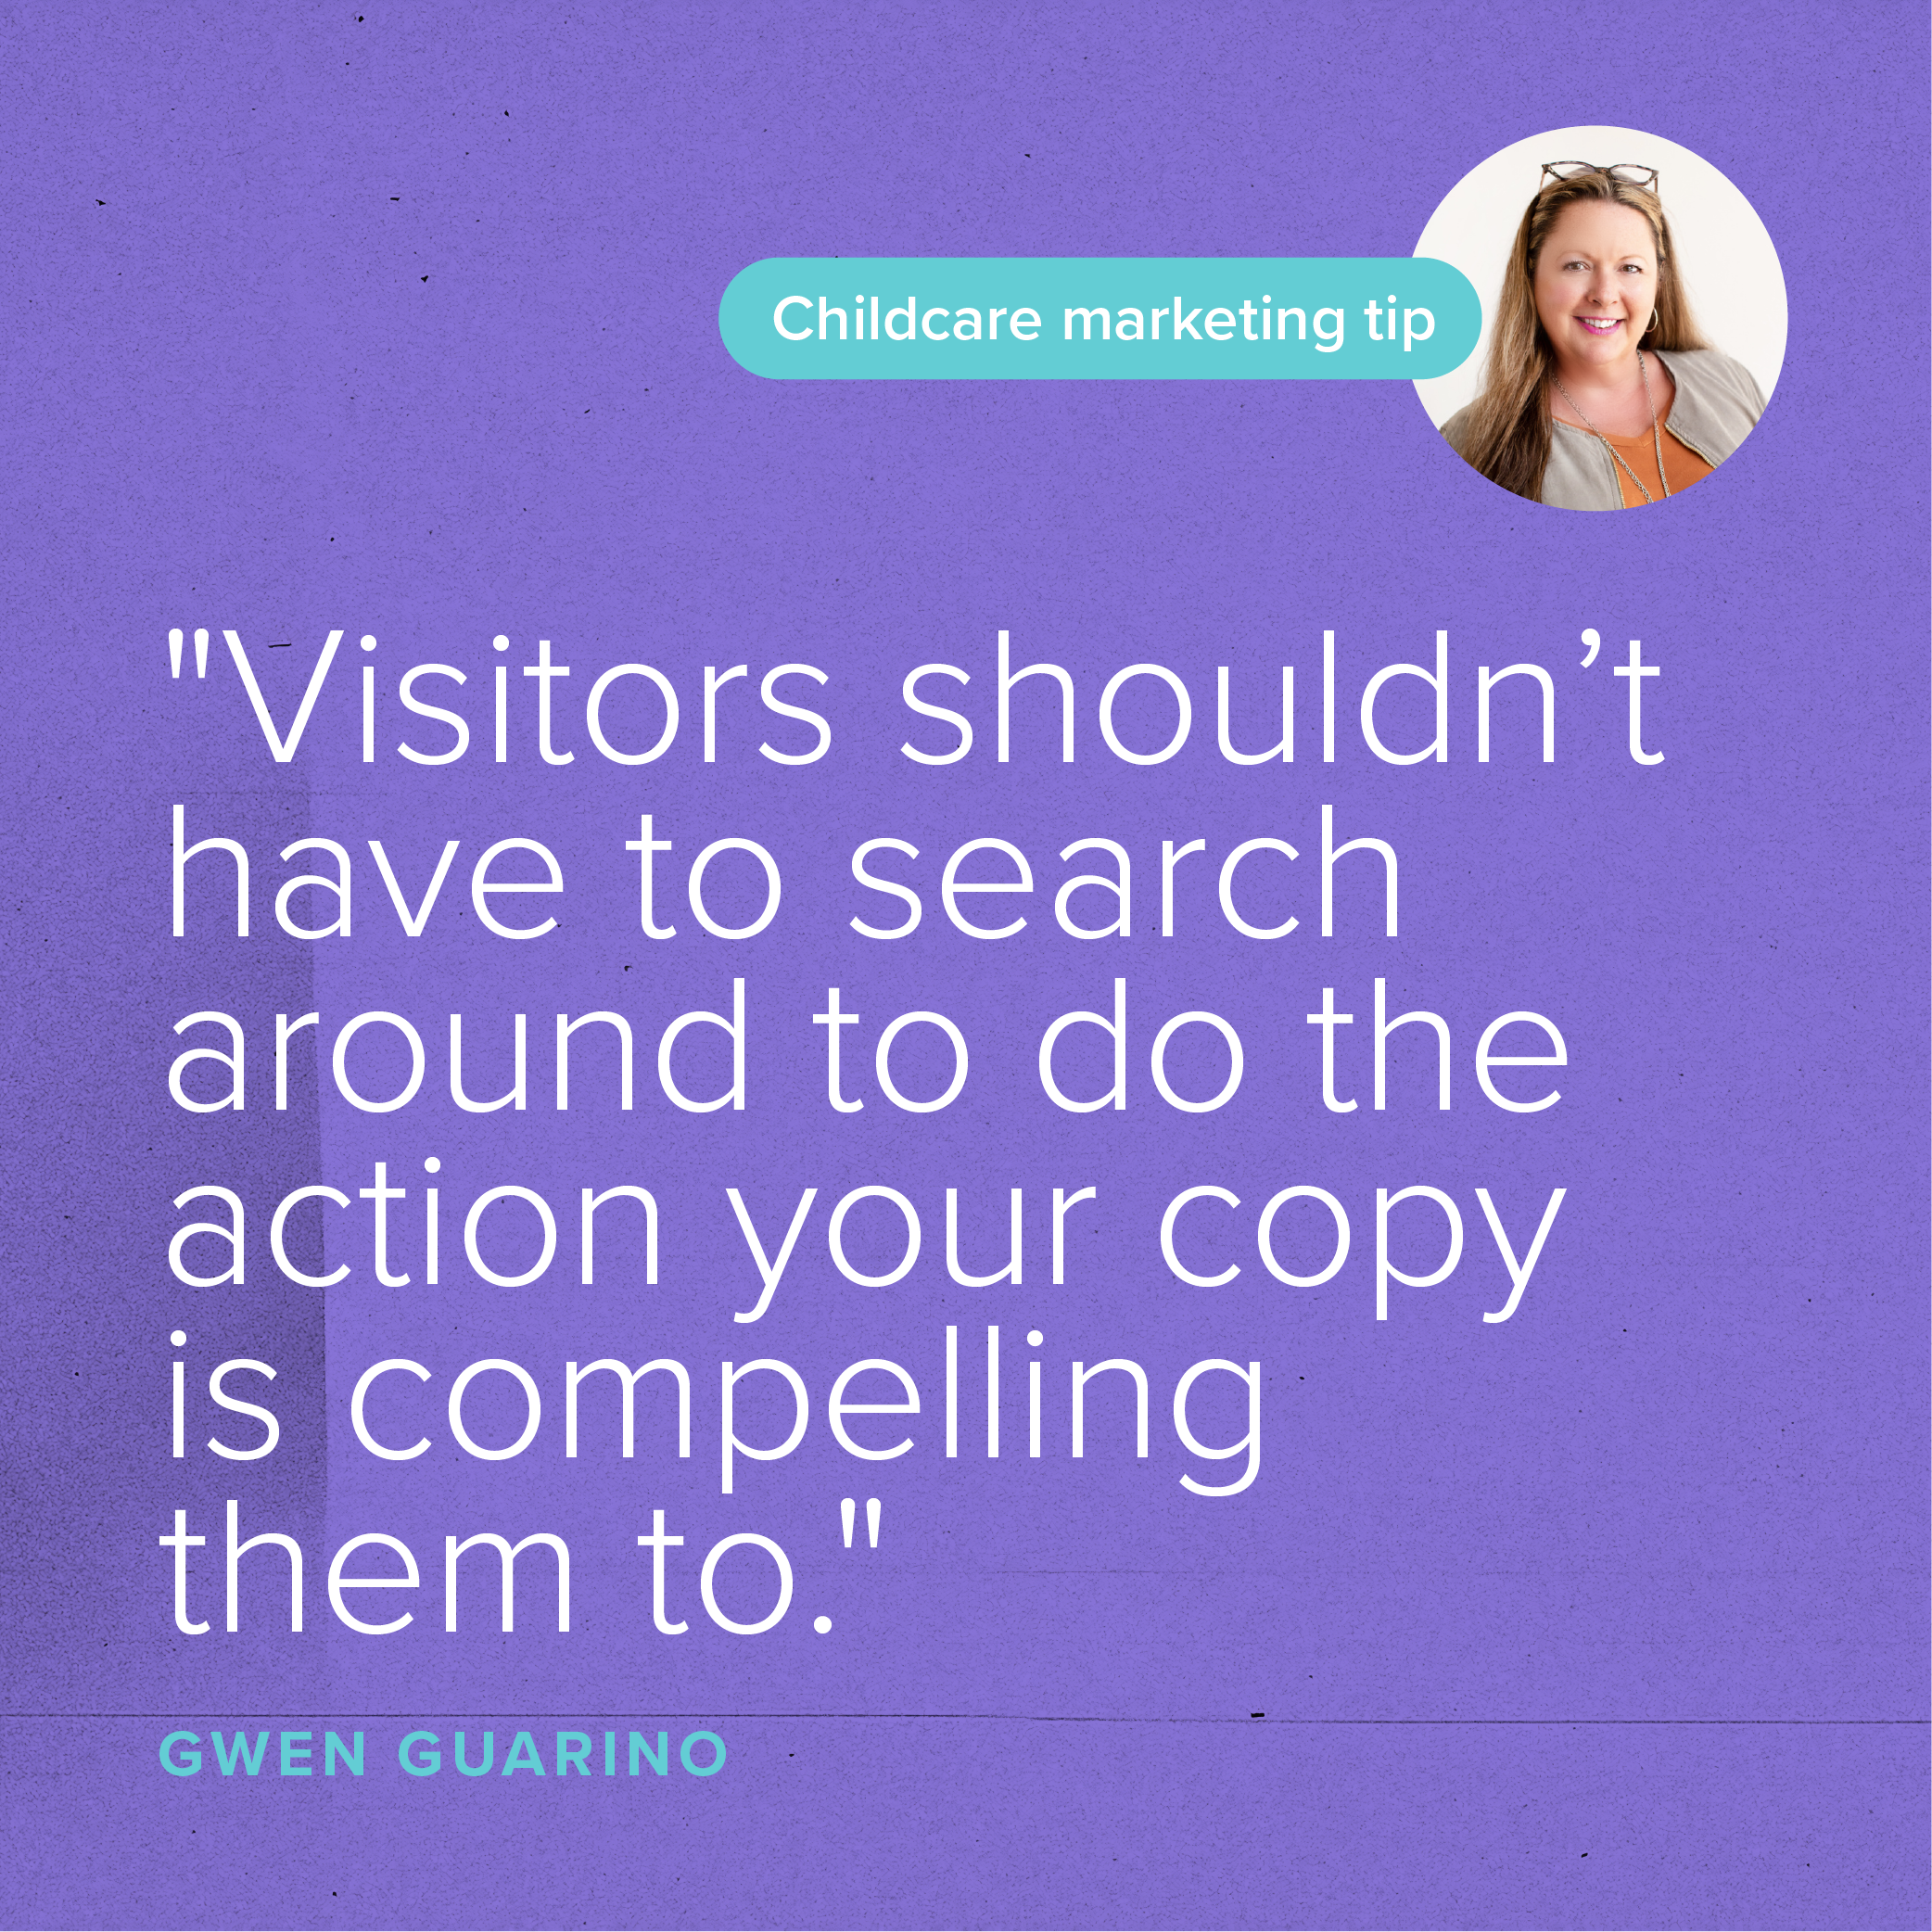 Quote: Where You Should Send Paid Ad Traffic